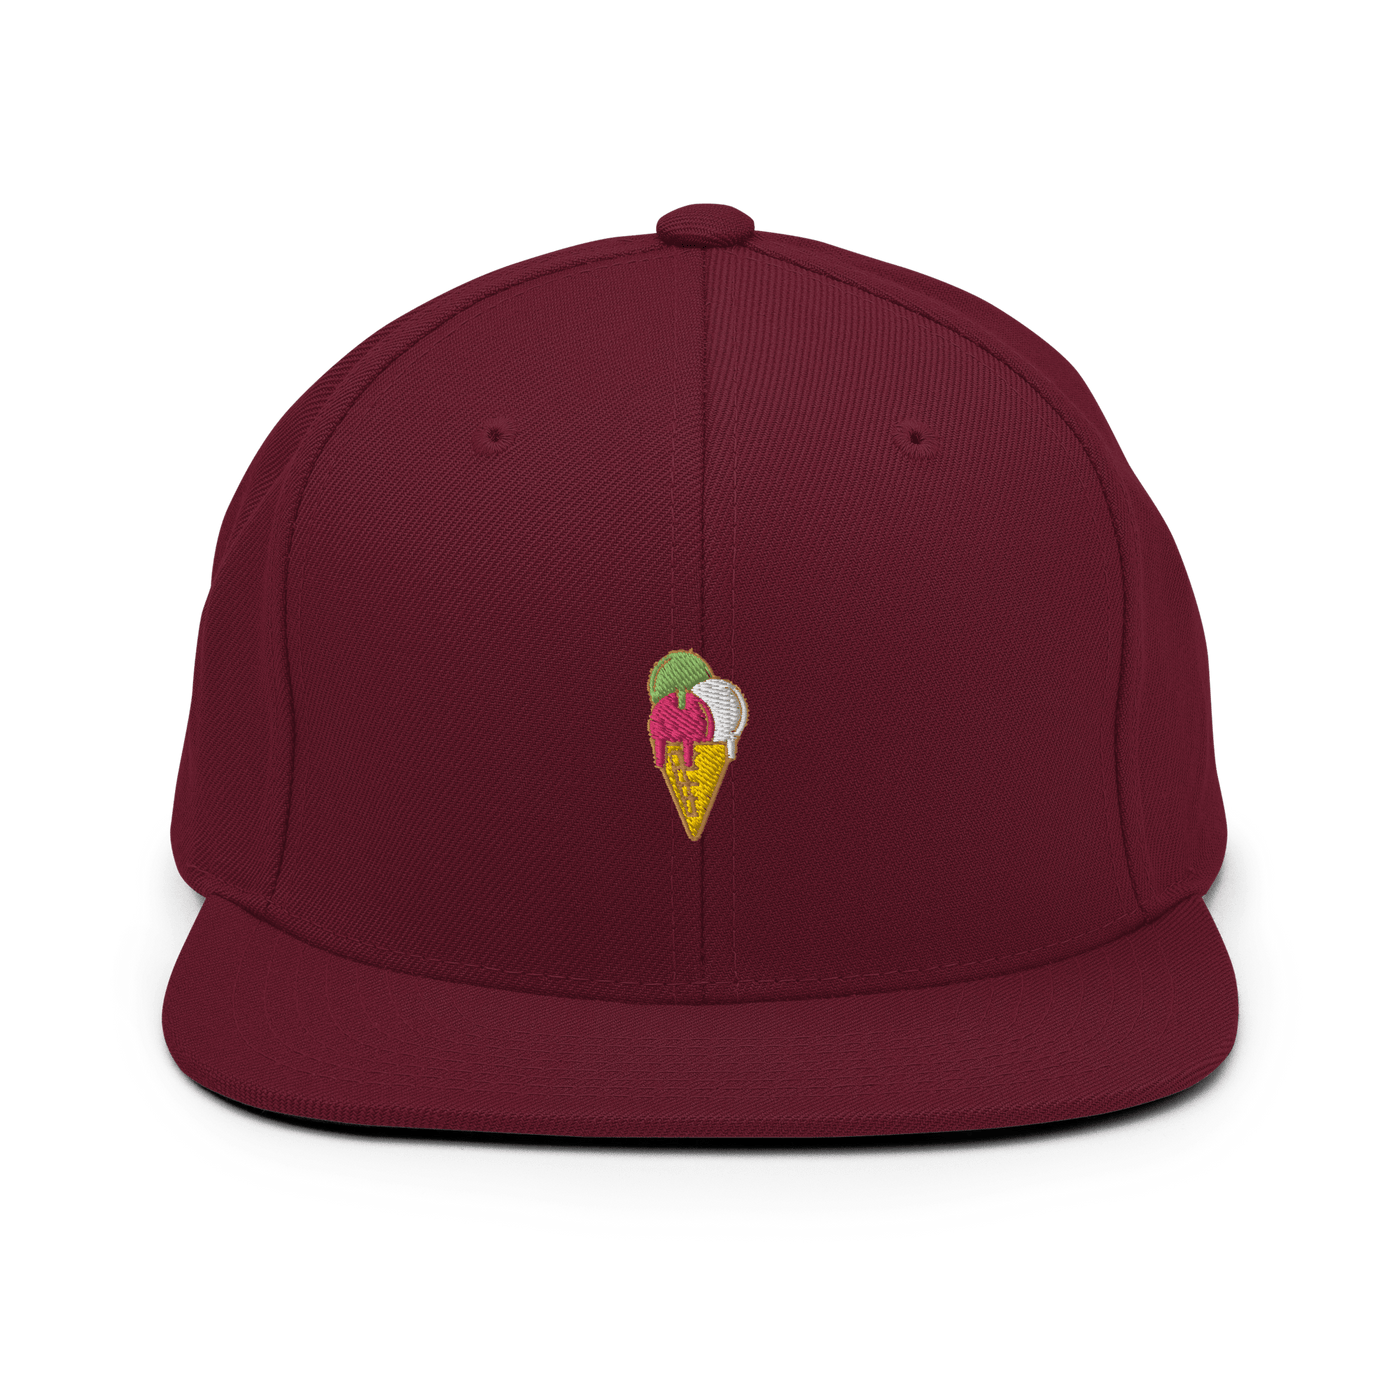 Ice Cream Cone Snapback - Maroon - - Just Another Cap Store